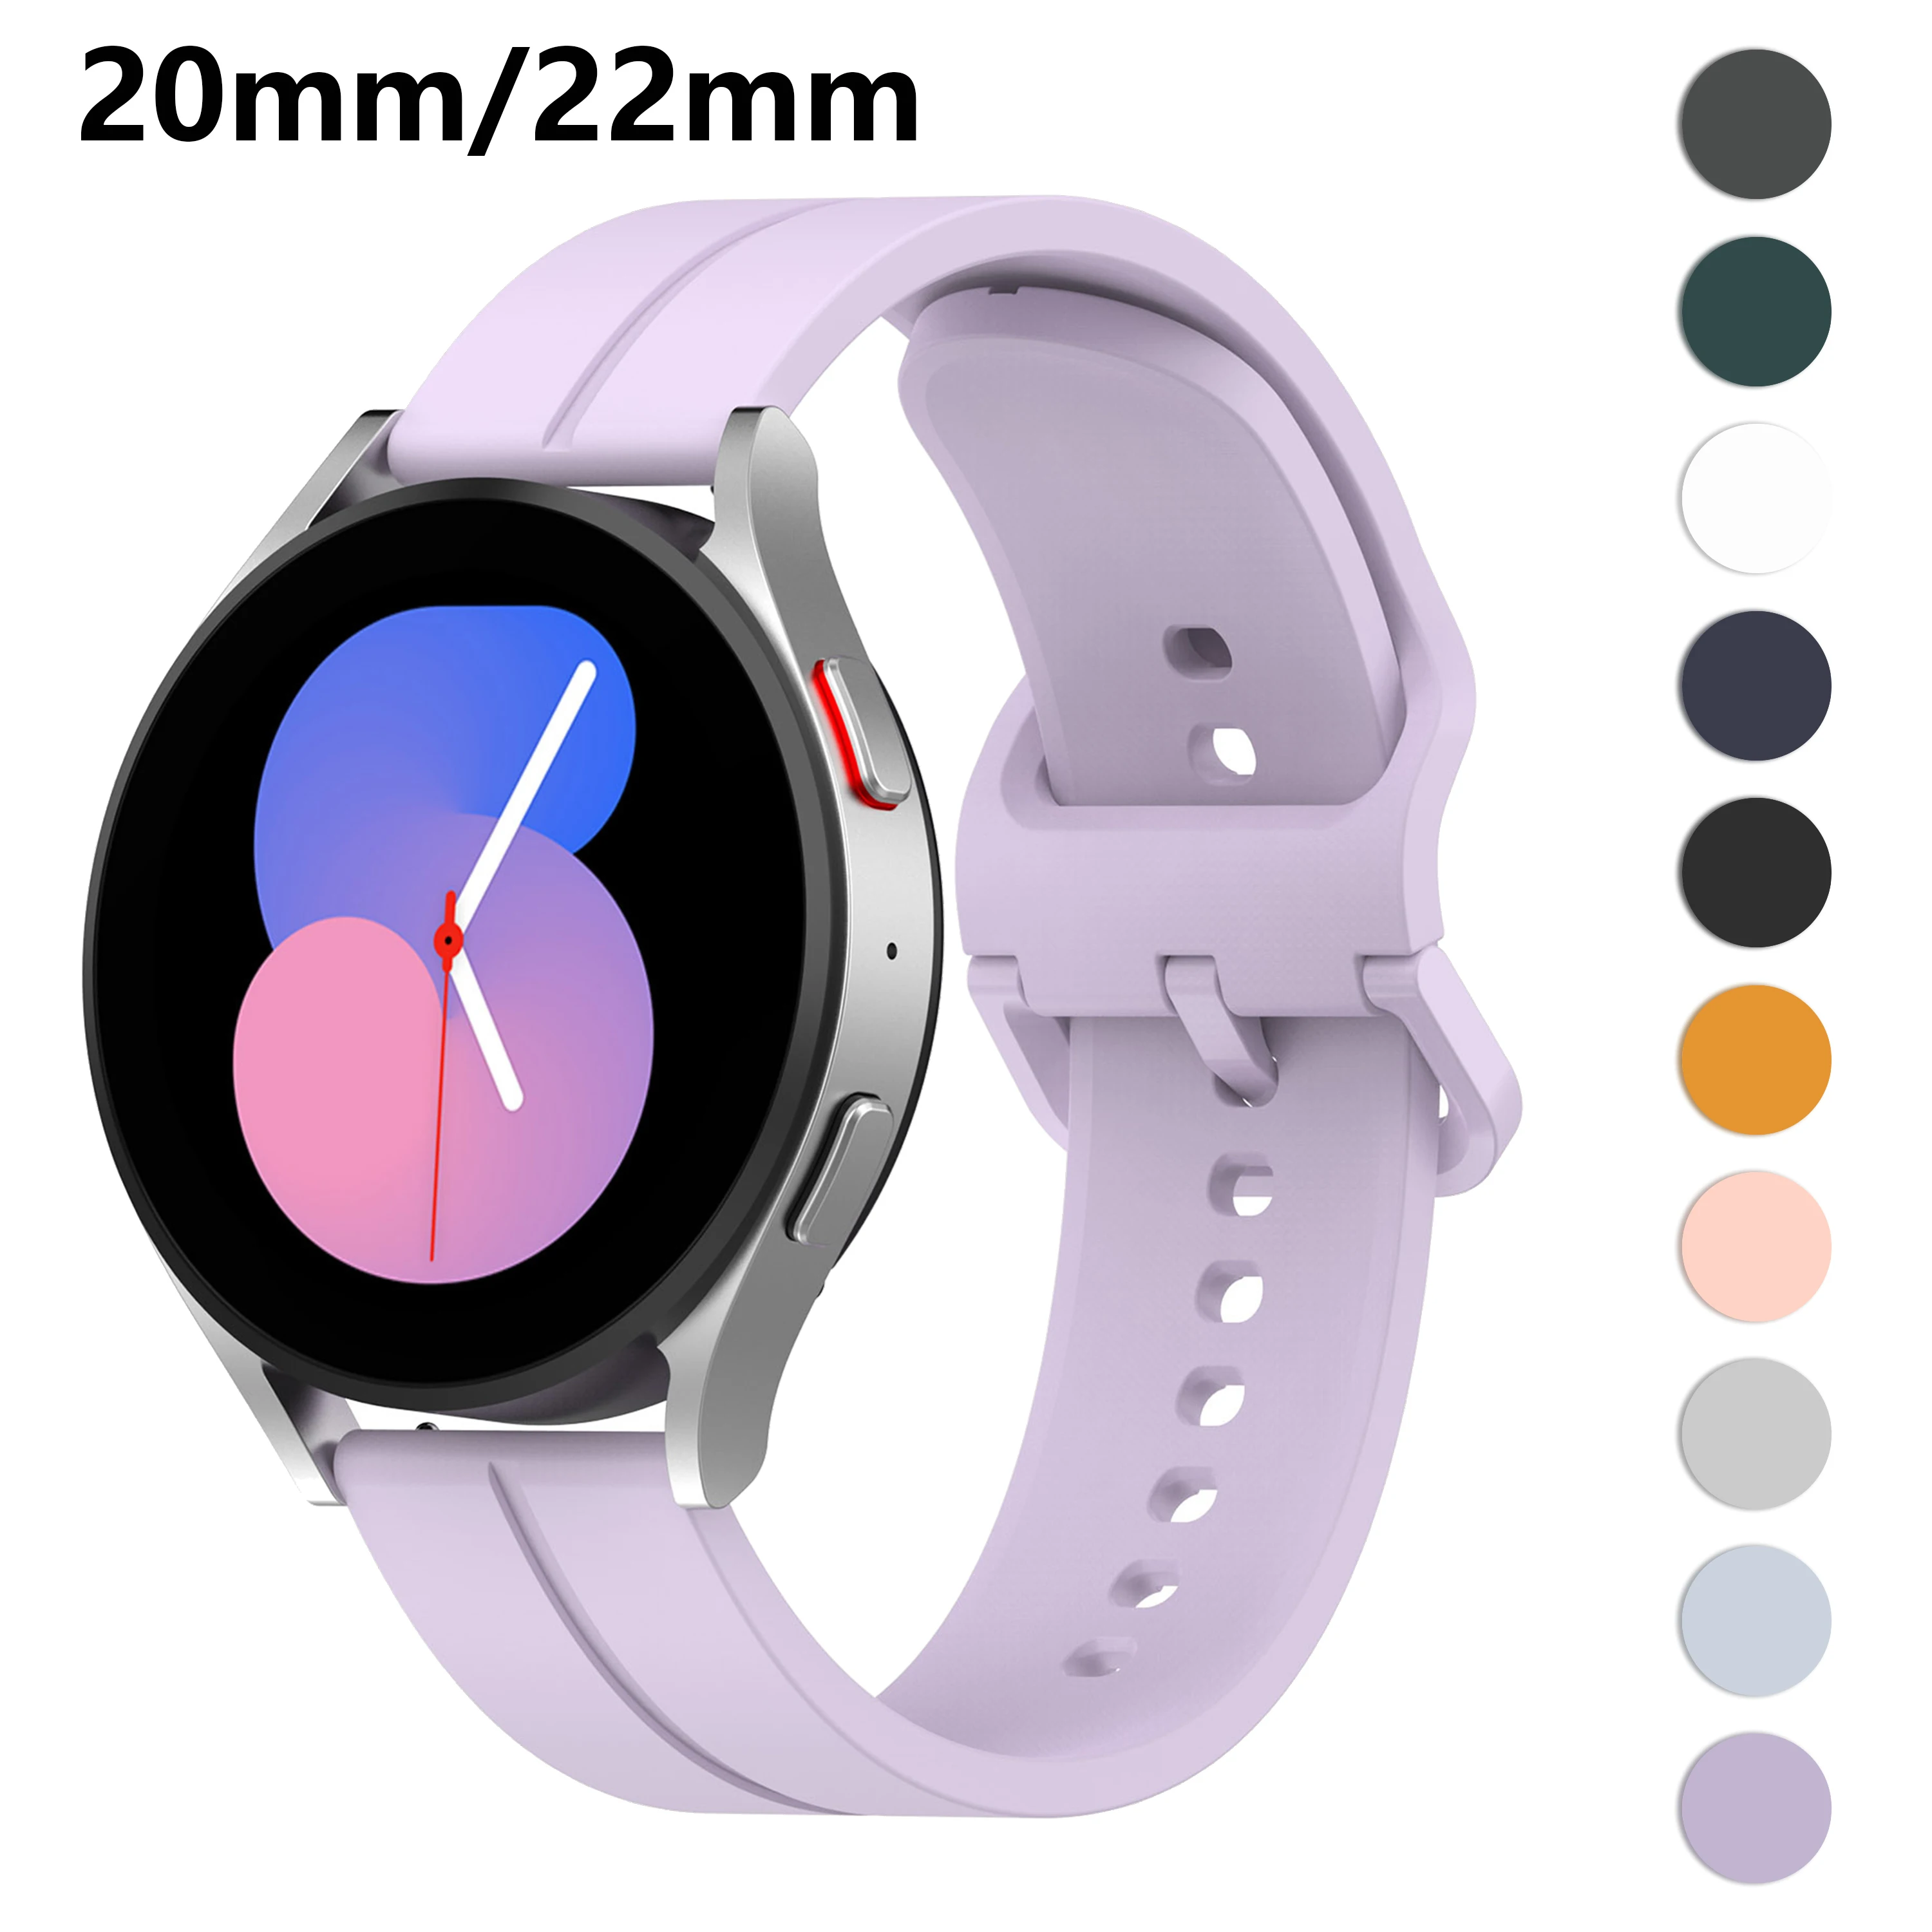 

Strap for Samsung Galaxy Watch 4 5 pro 40mm 44mm Watch band 20 22mm bracelet galaxy watch 3 41mm 45mm Active2 Gear S2 S3 classic